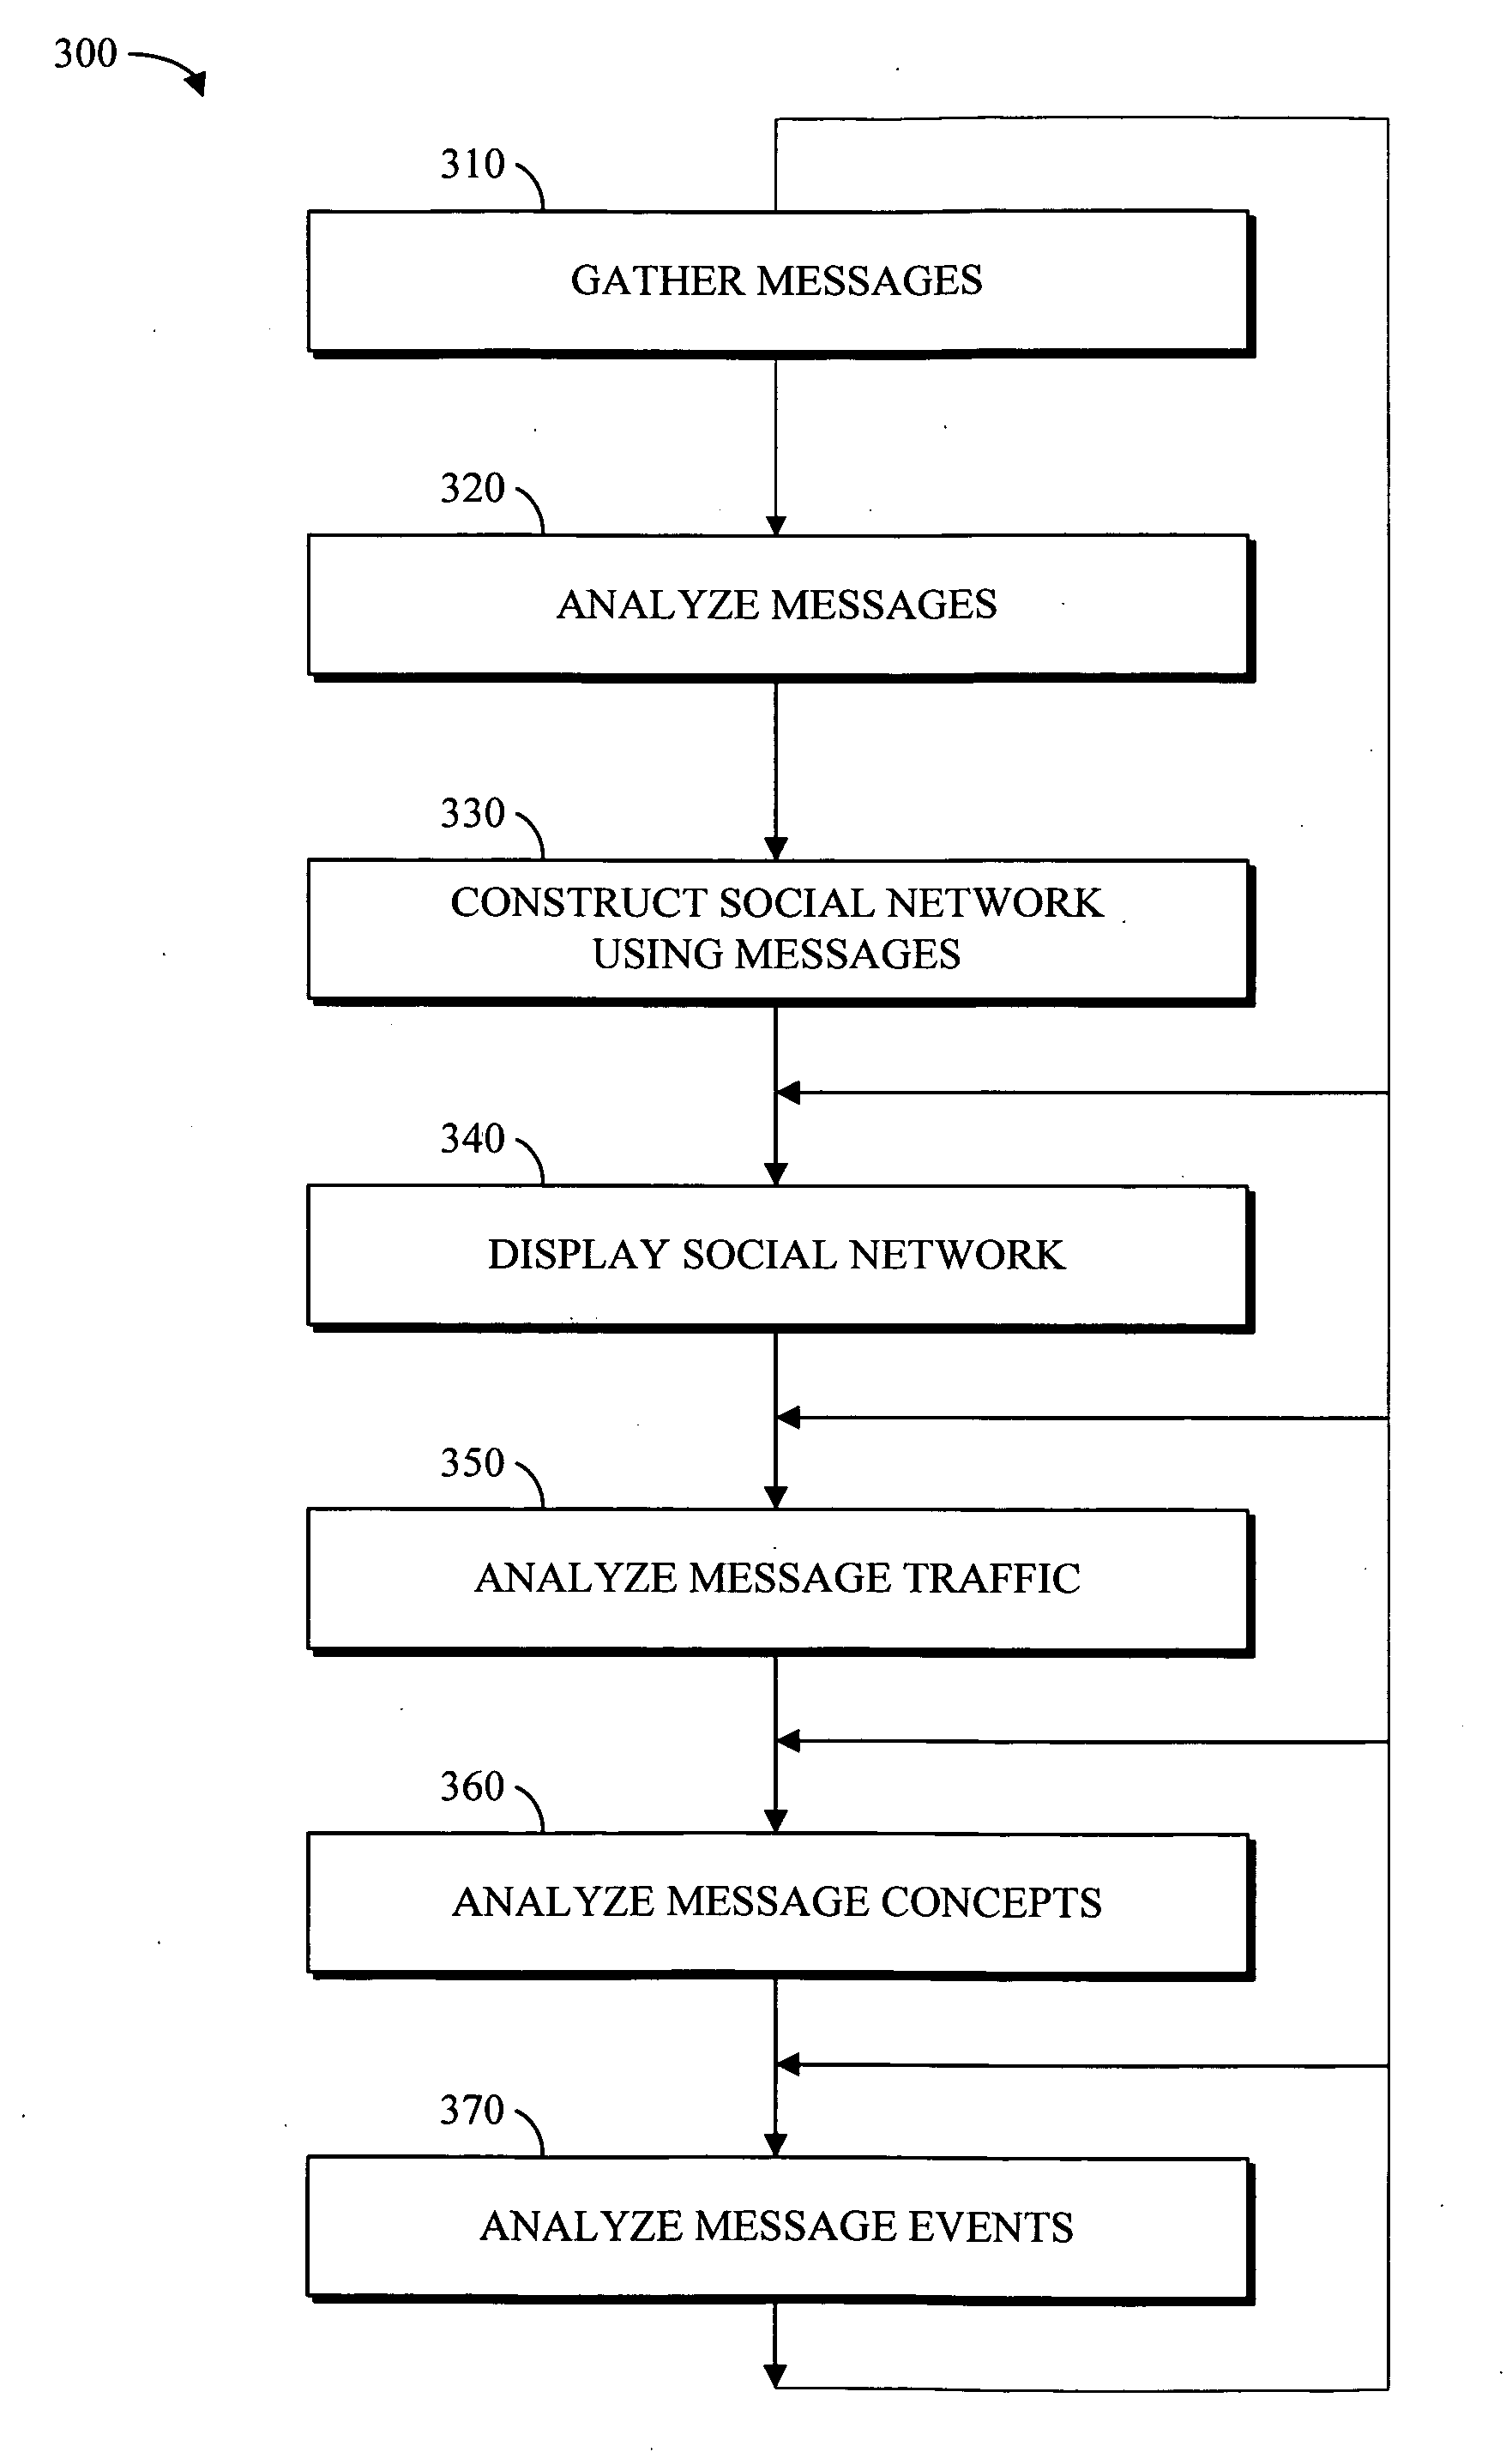 Apparatus and method for message-centric analysis and multi-aspect viewing using social networks